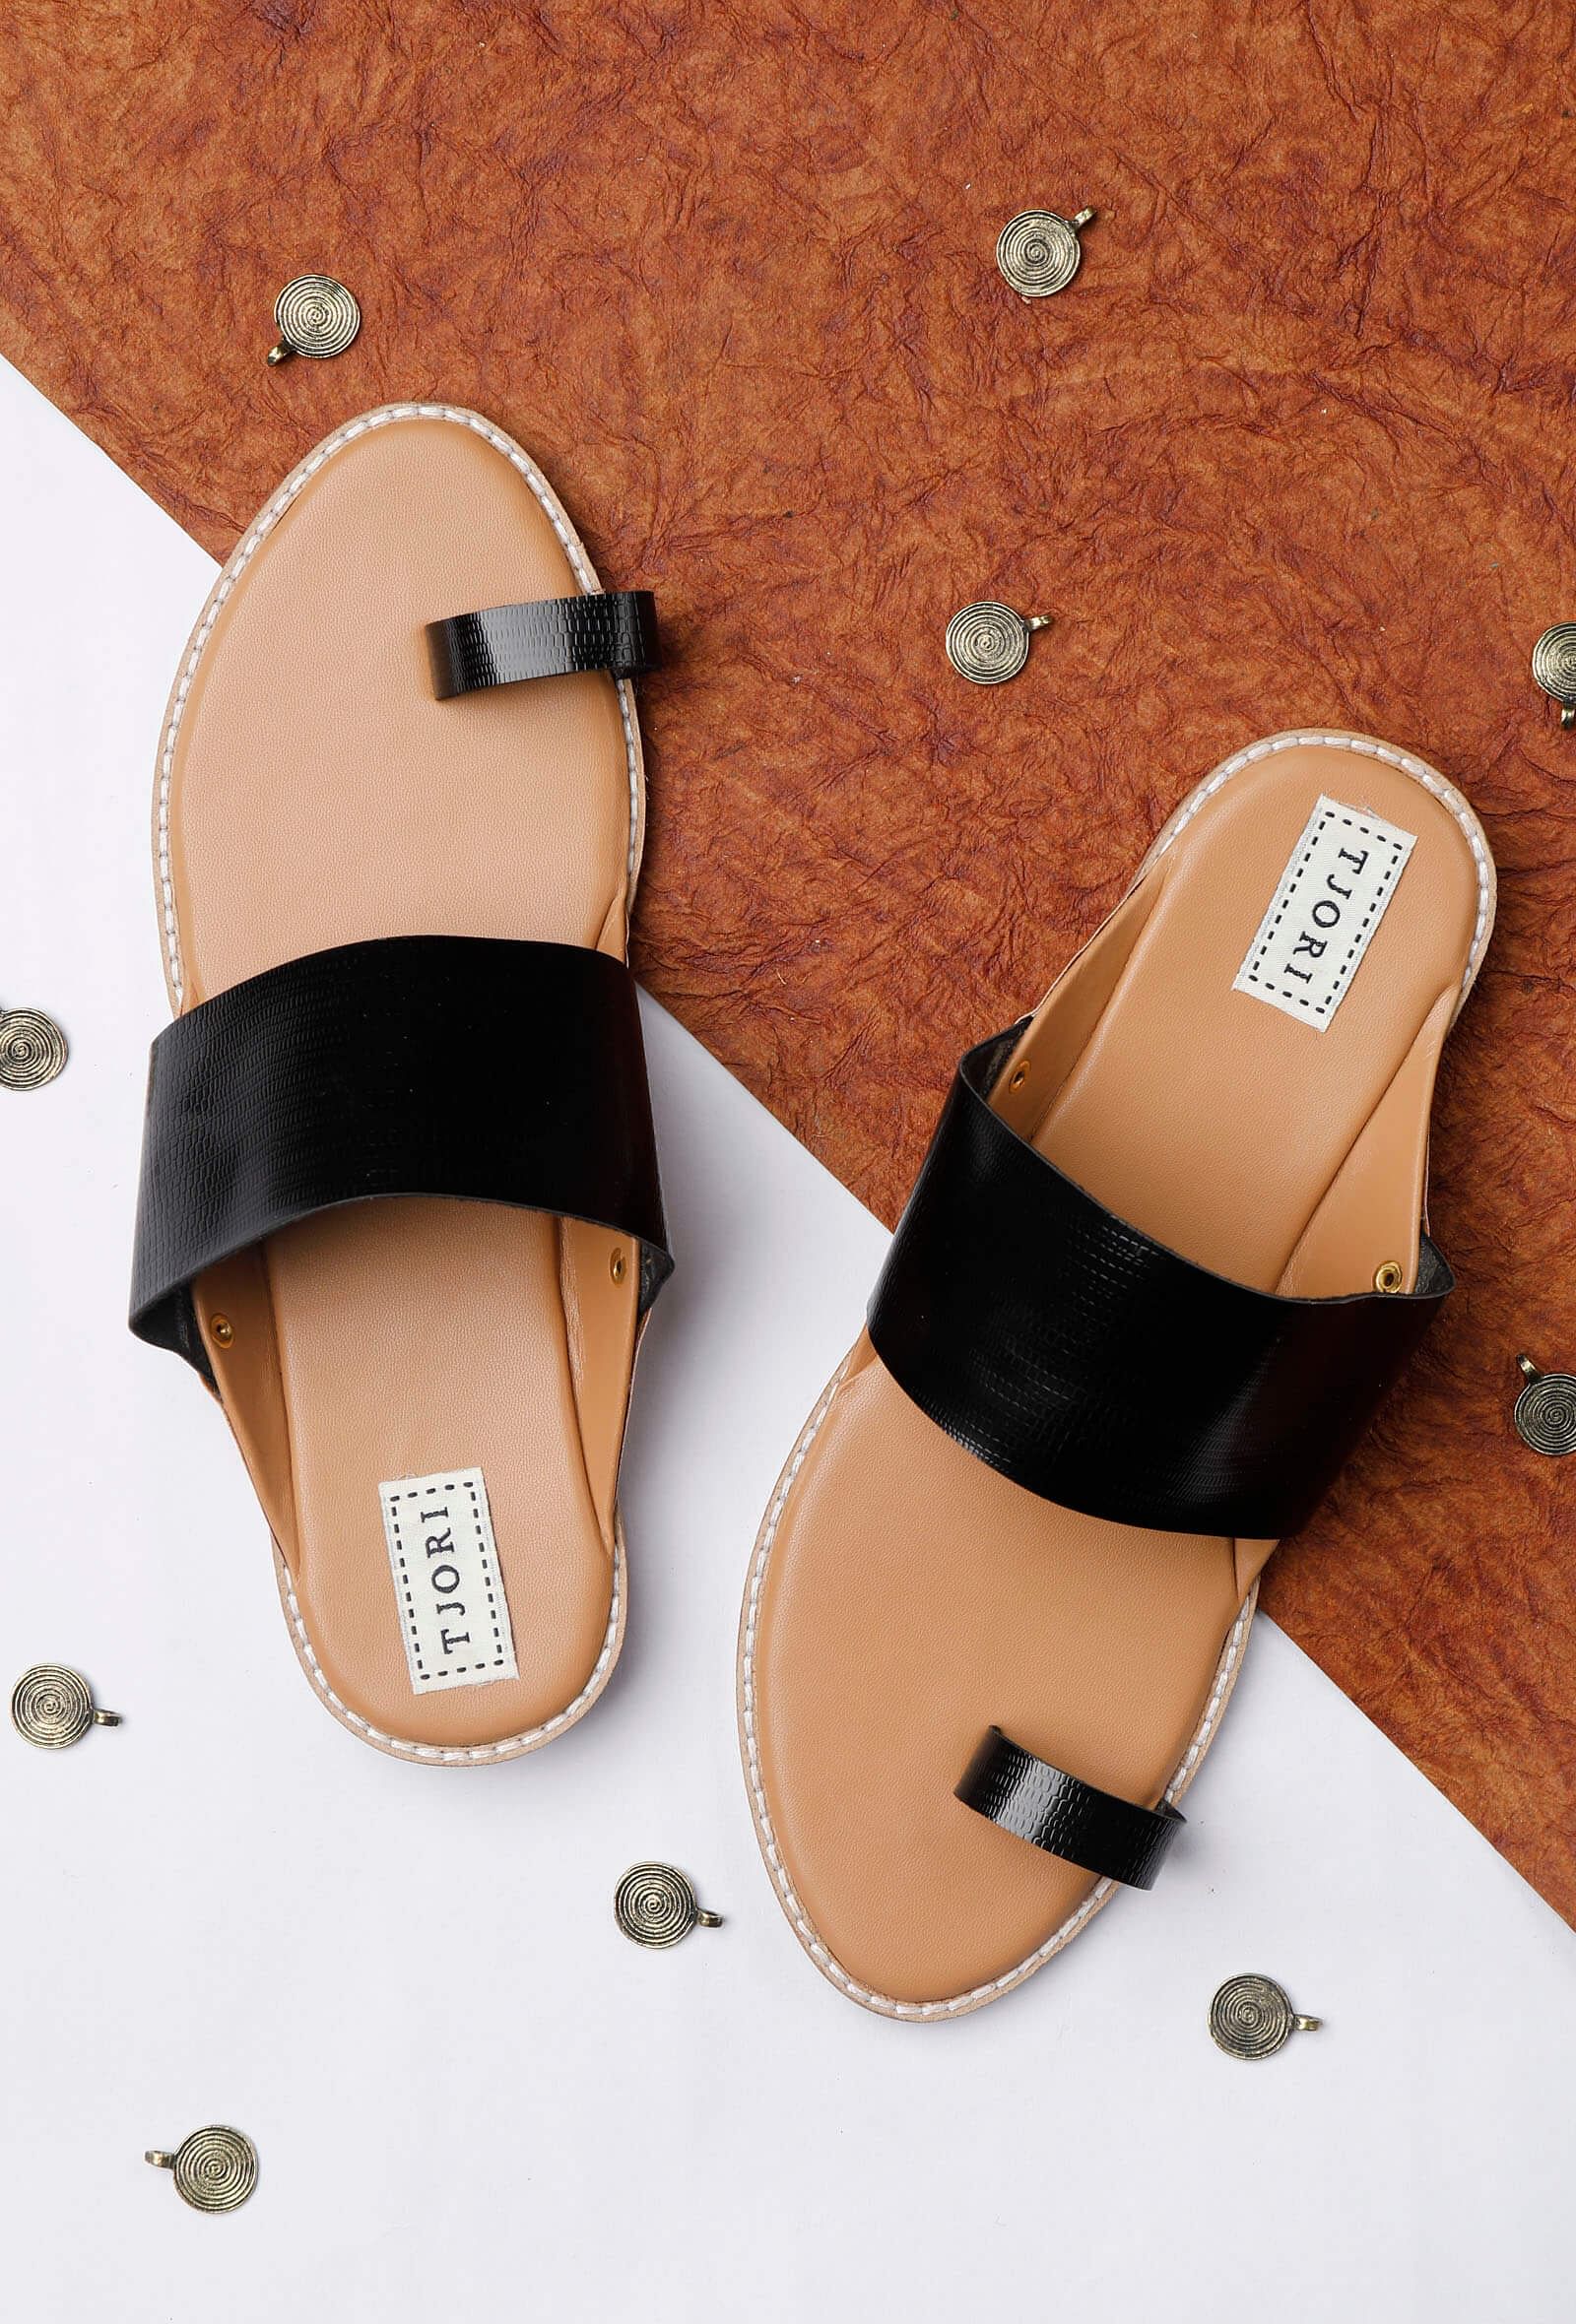 Black Cruelty Free Leather Sandals